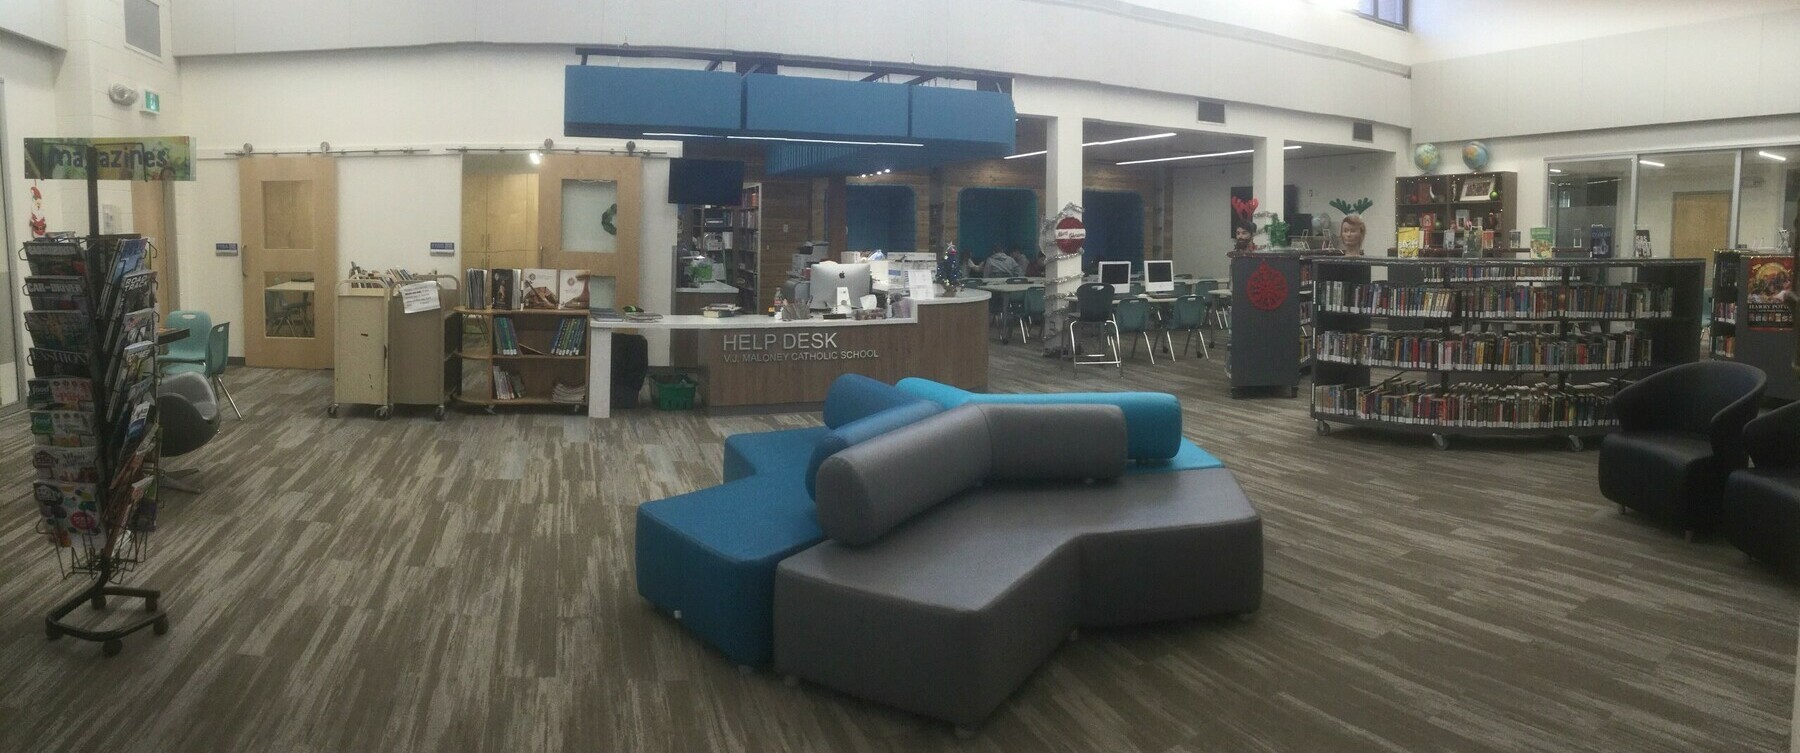 Welcome to the VJM library learning commons!